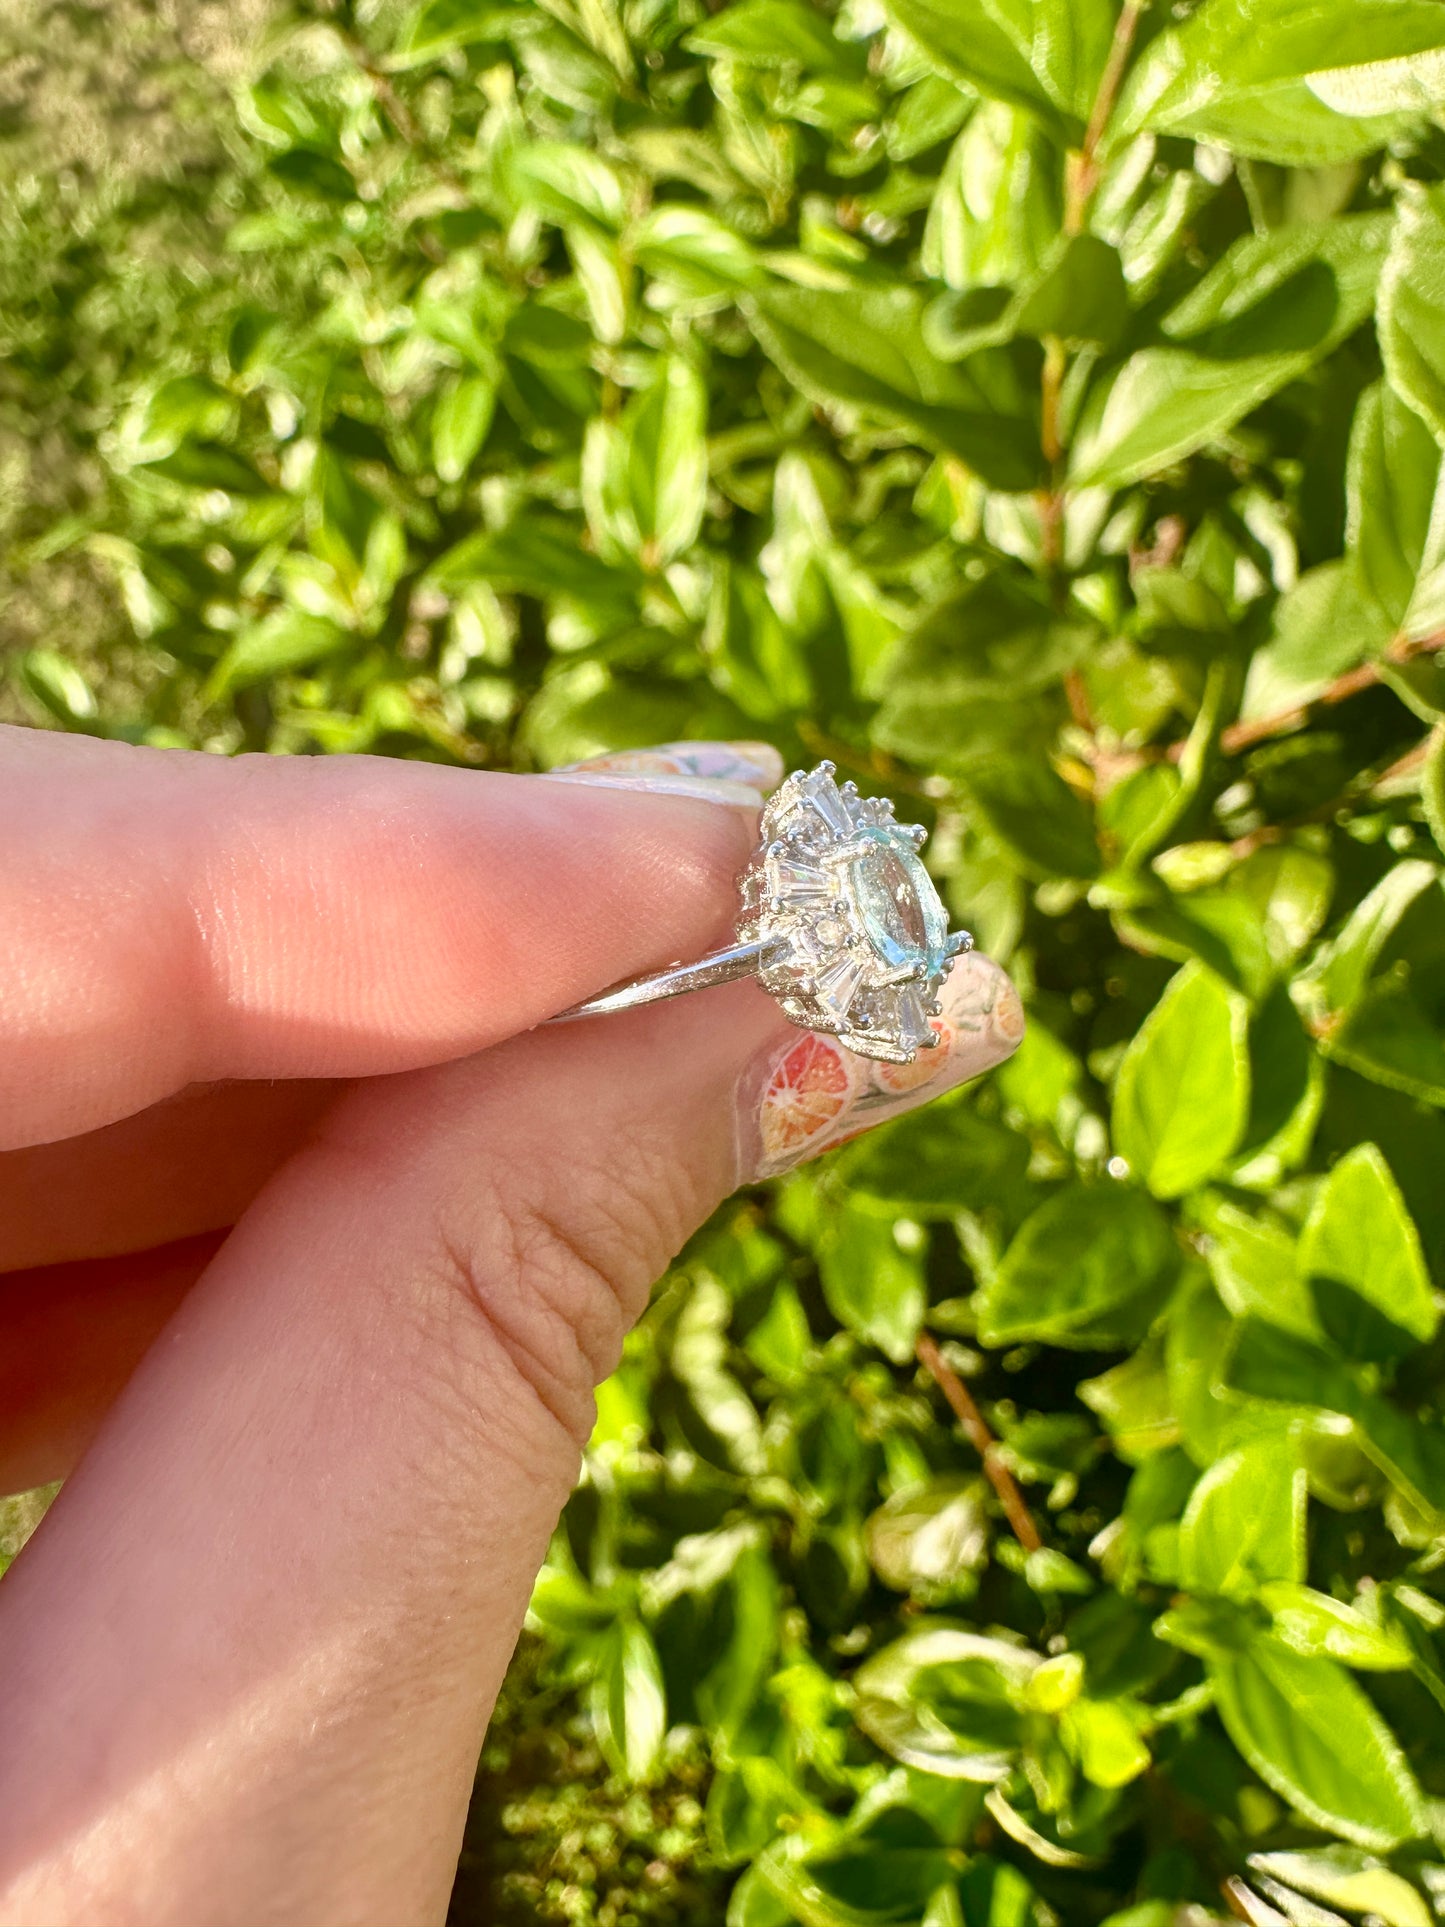 Aquamarine Adjustable Sterling Silver Ring, Elegant Blue Gemstone Ring, Perfect Gift for Her, March Birthstone Jewelry, Unique Handmade Ring